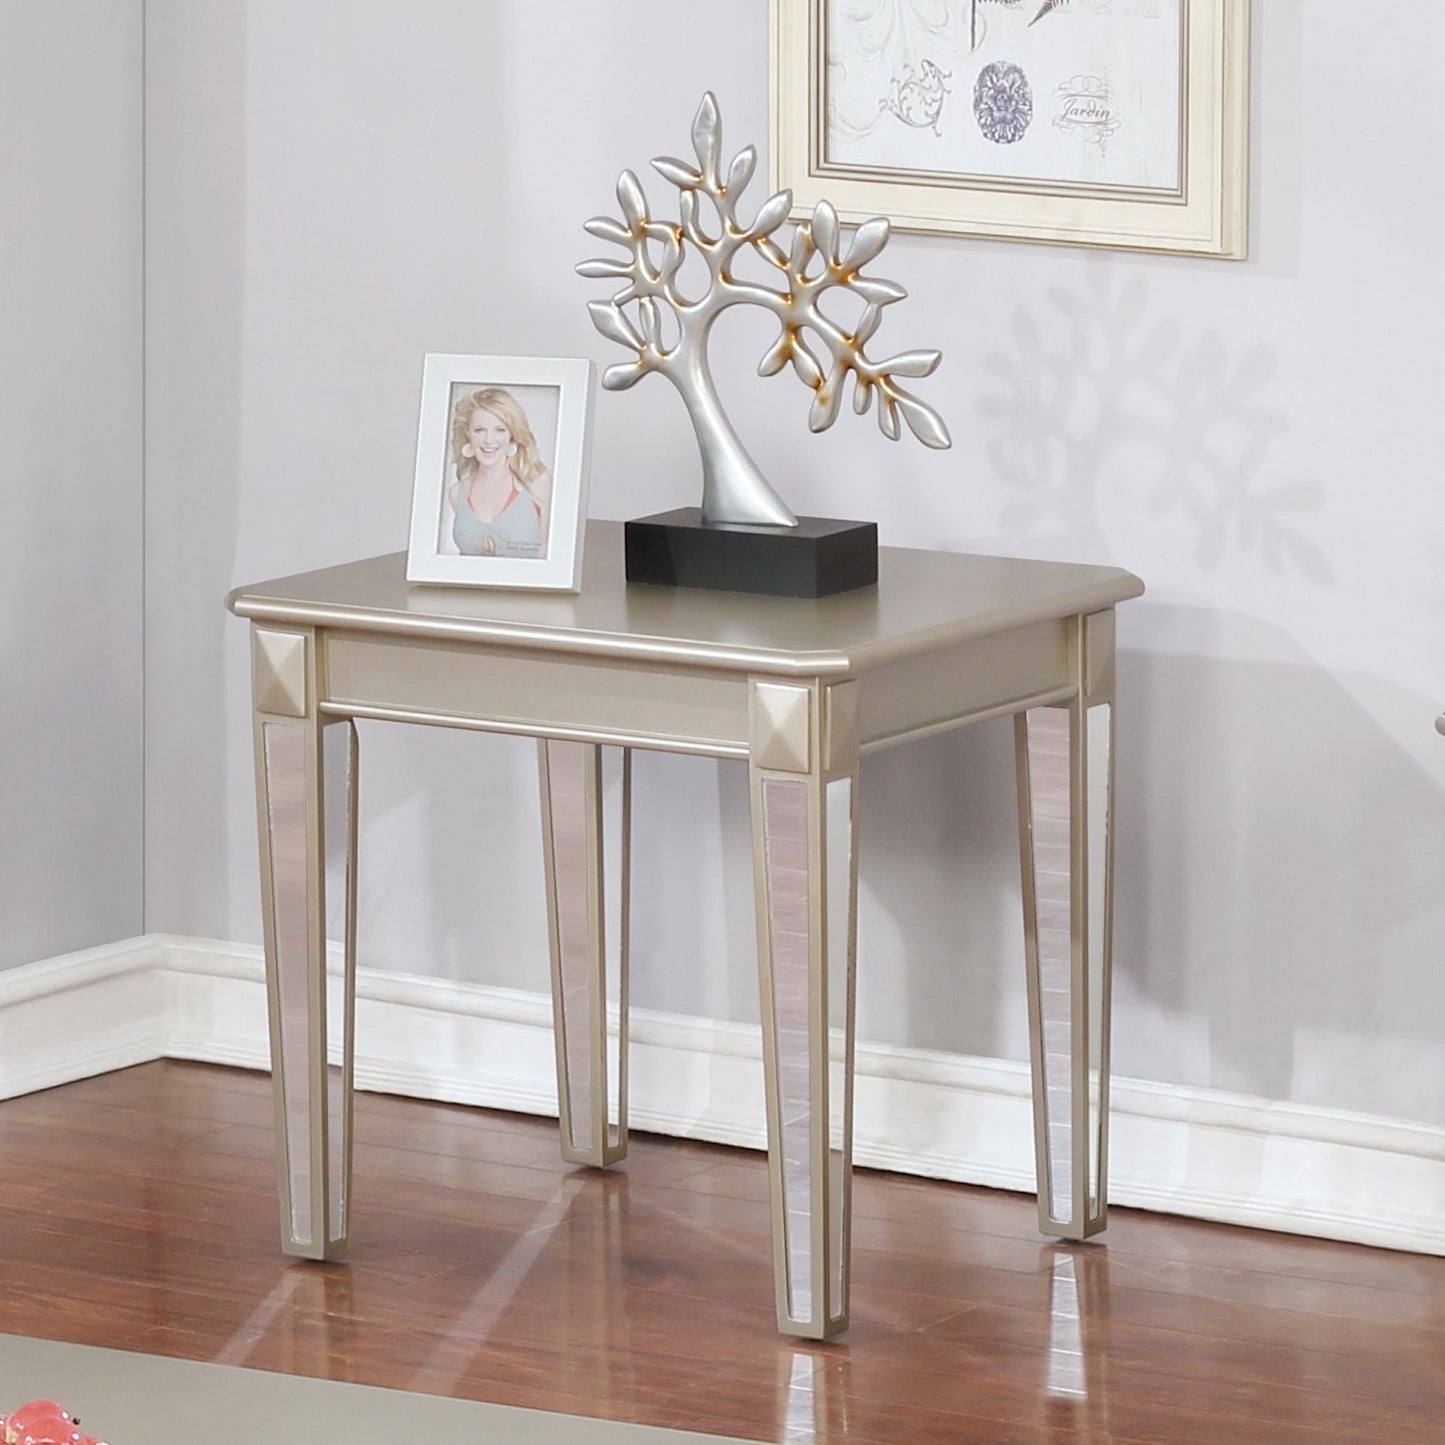 Barent Contemporary Wood End Table with Mirrored Legs, Champagne